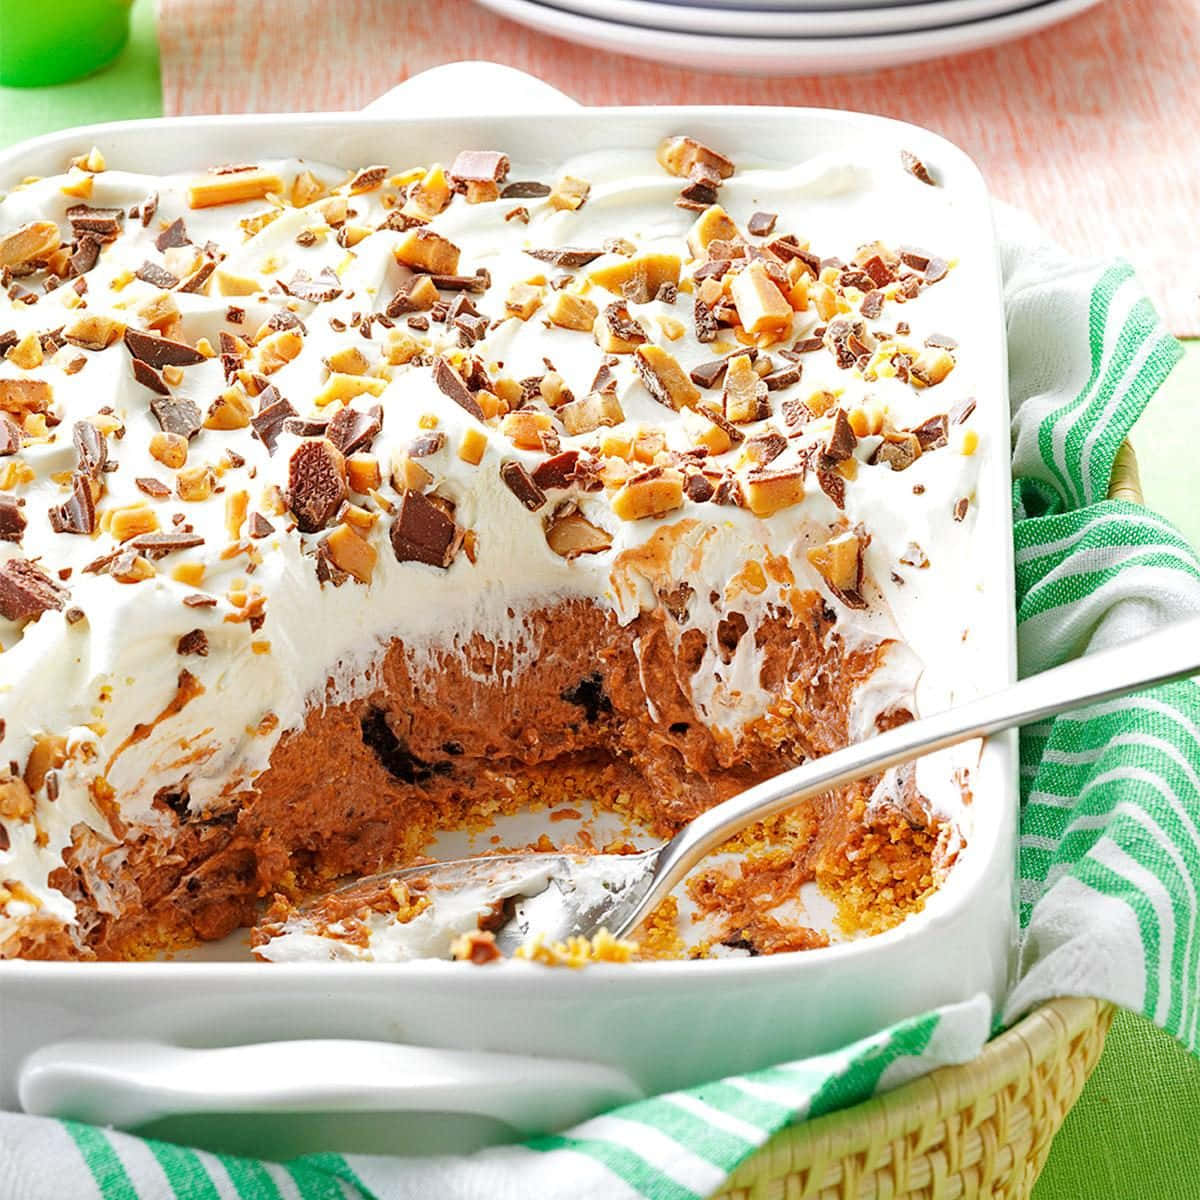 Satisfy Your Sweet Tooth with this Delicious Dessert